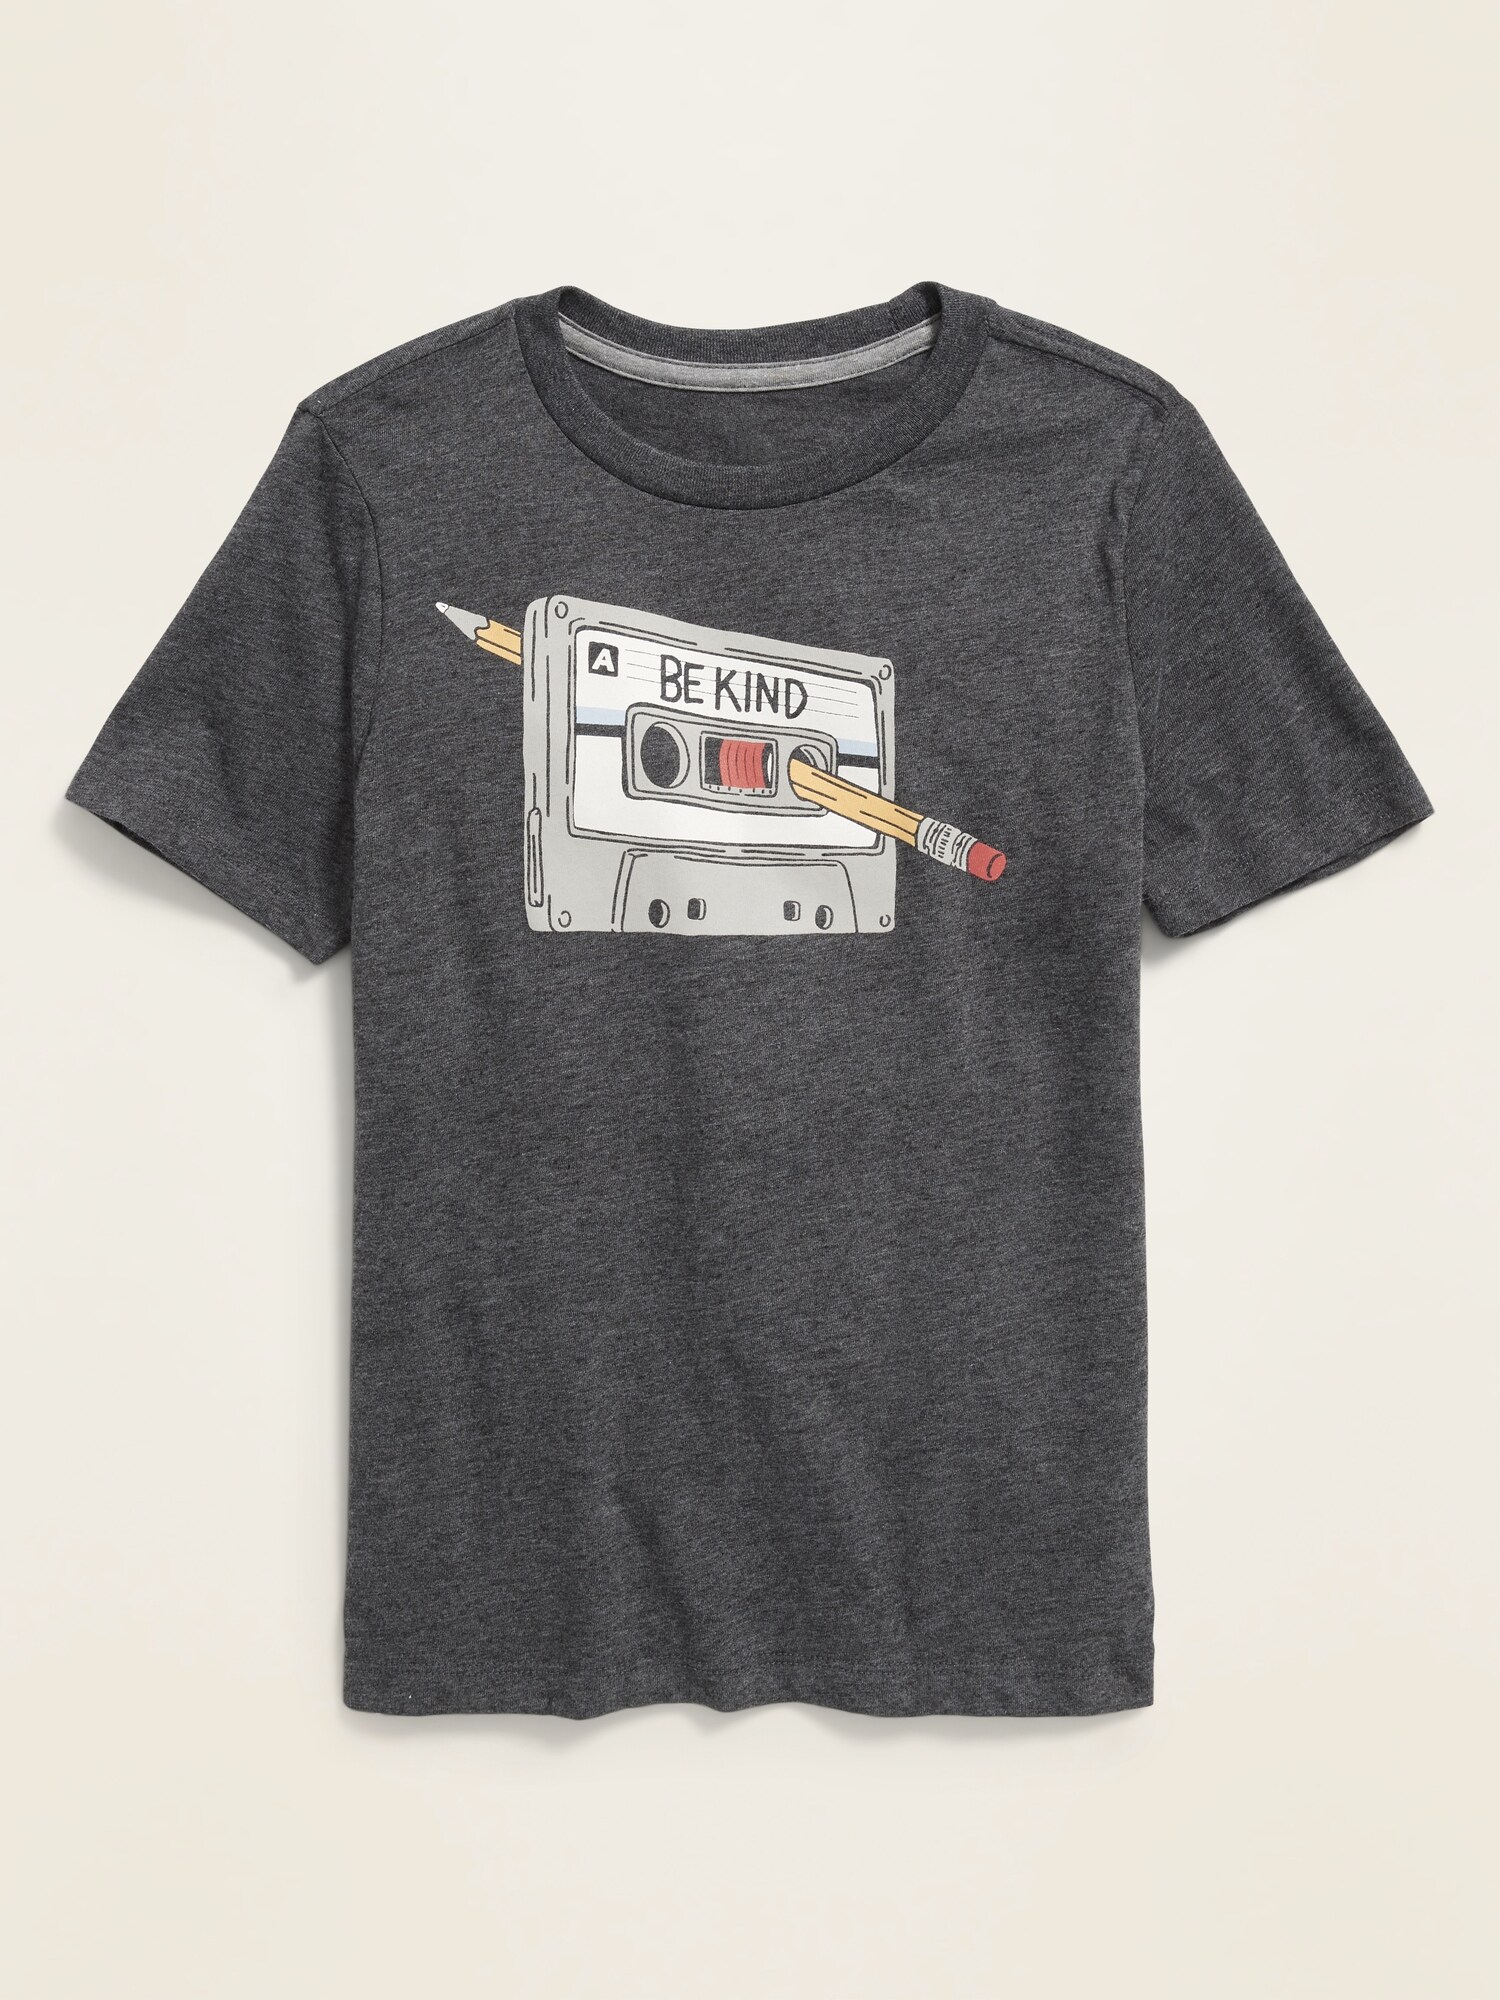 *Hot Deal* Short-Sleeve Graphic Tee for Boys